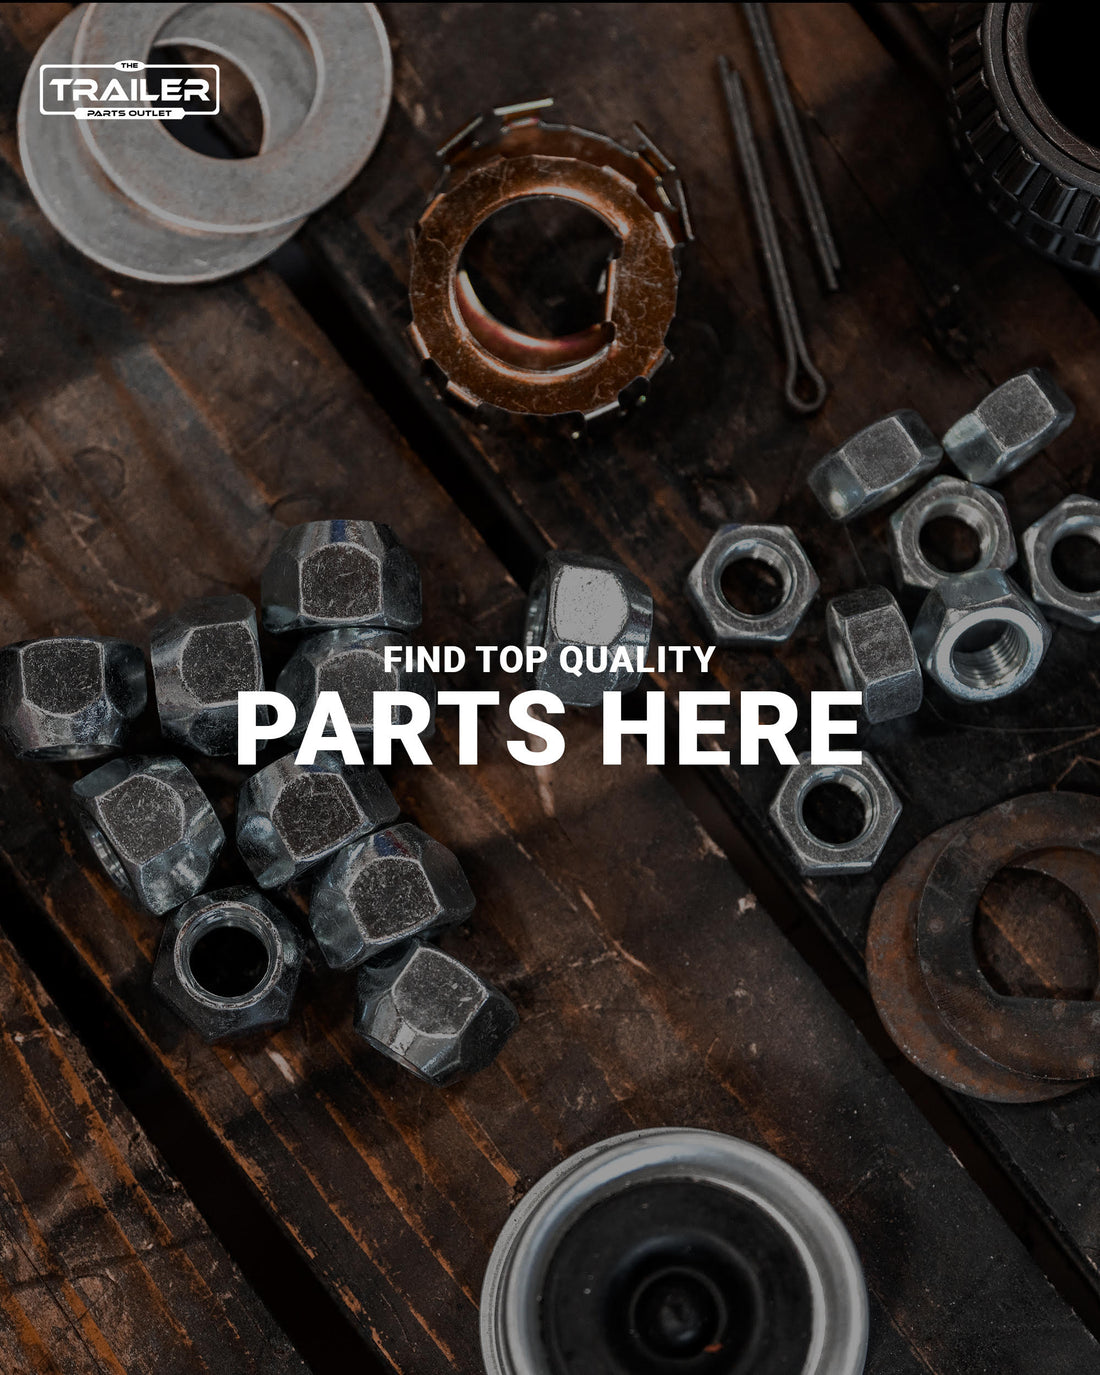 Repairing Your Trailer? Find Top-Quality Parts Here